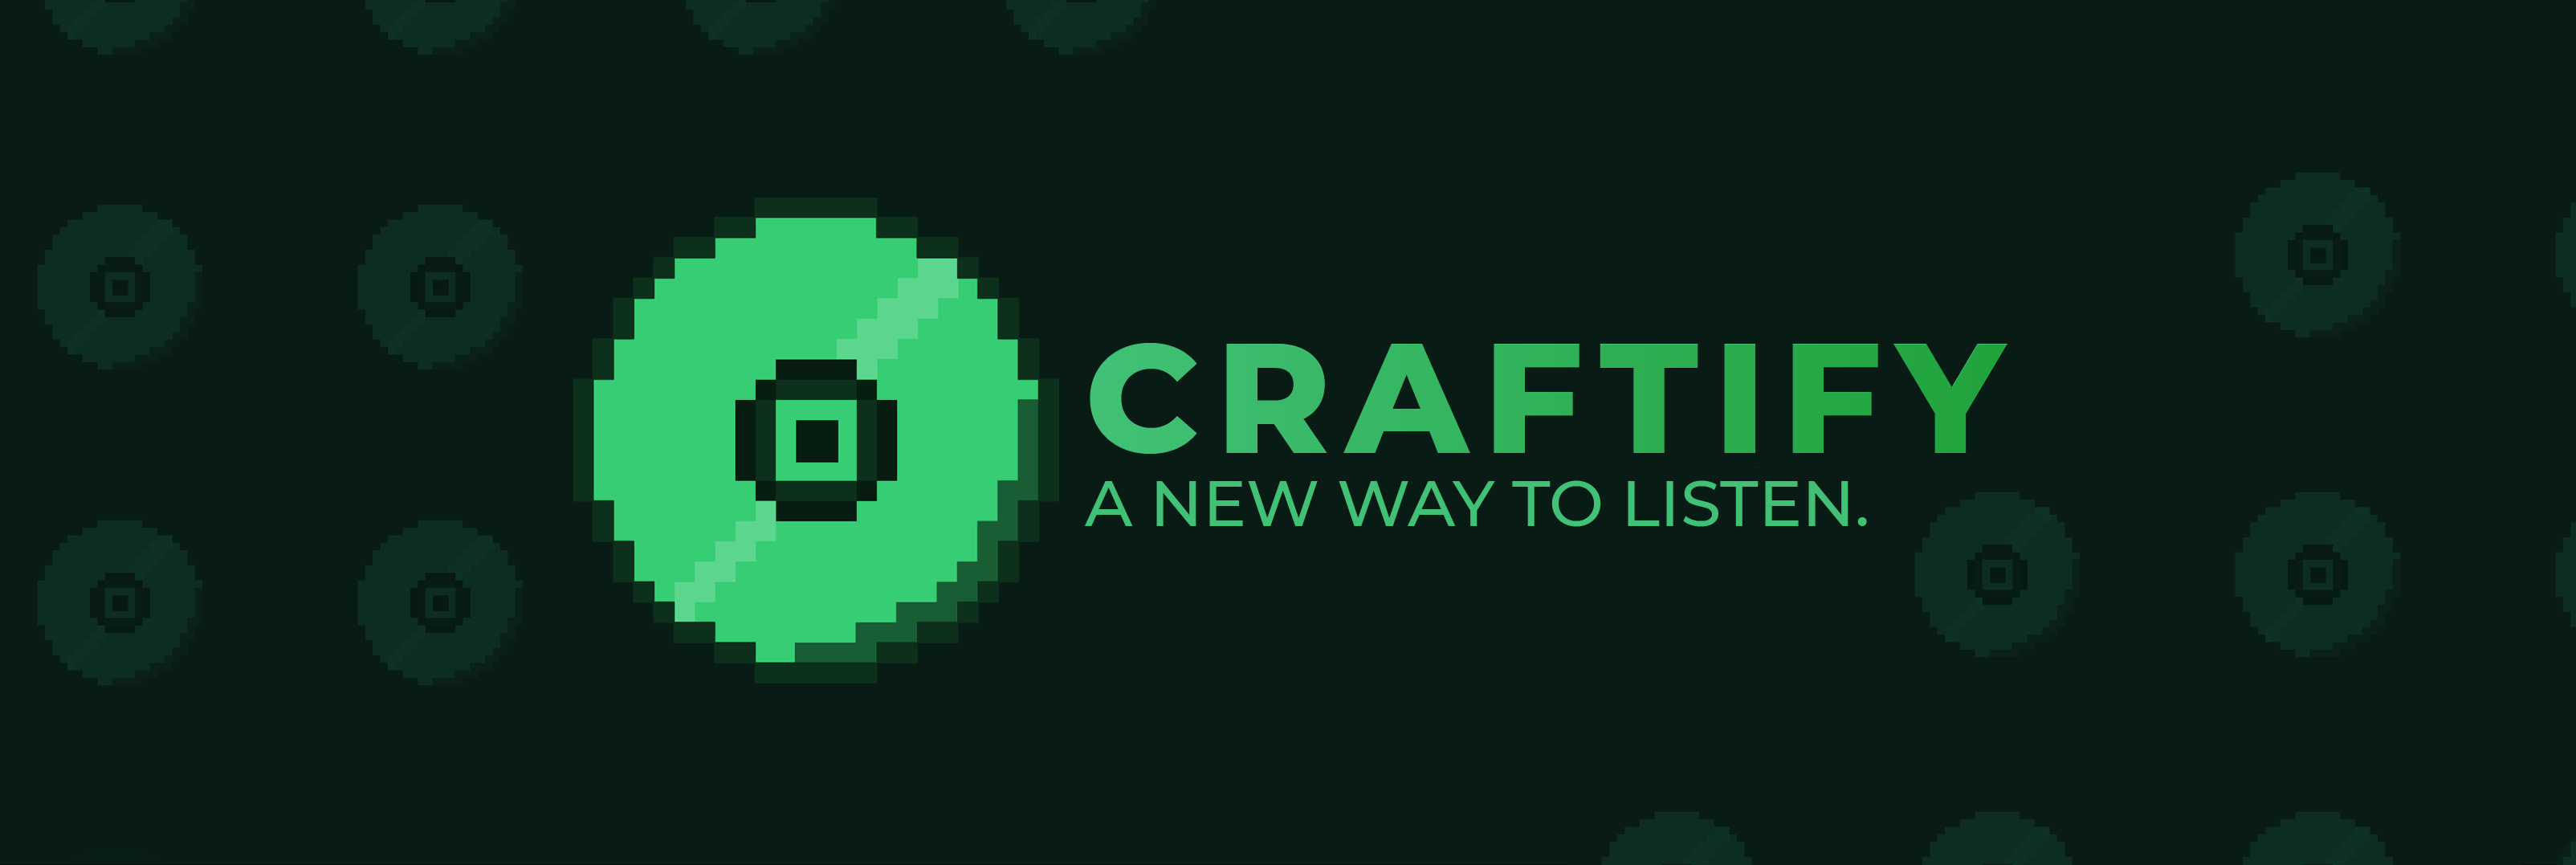 Banner image for Craftify